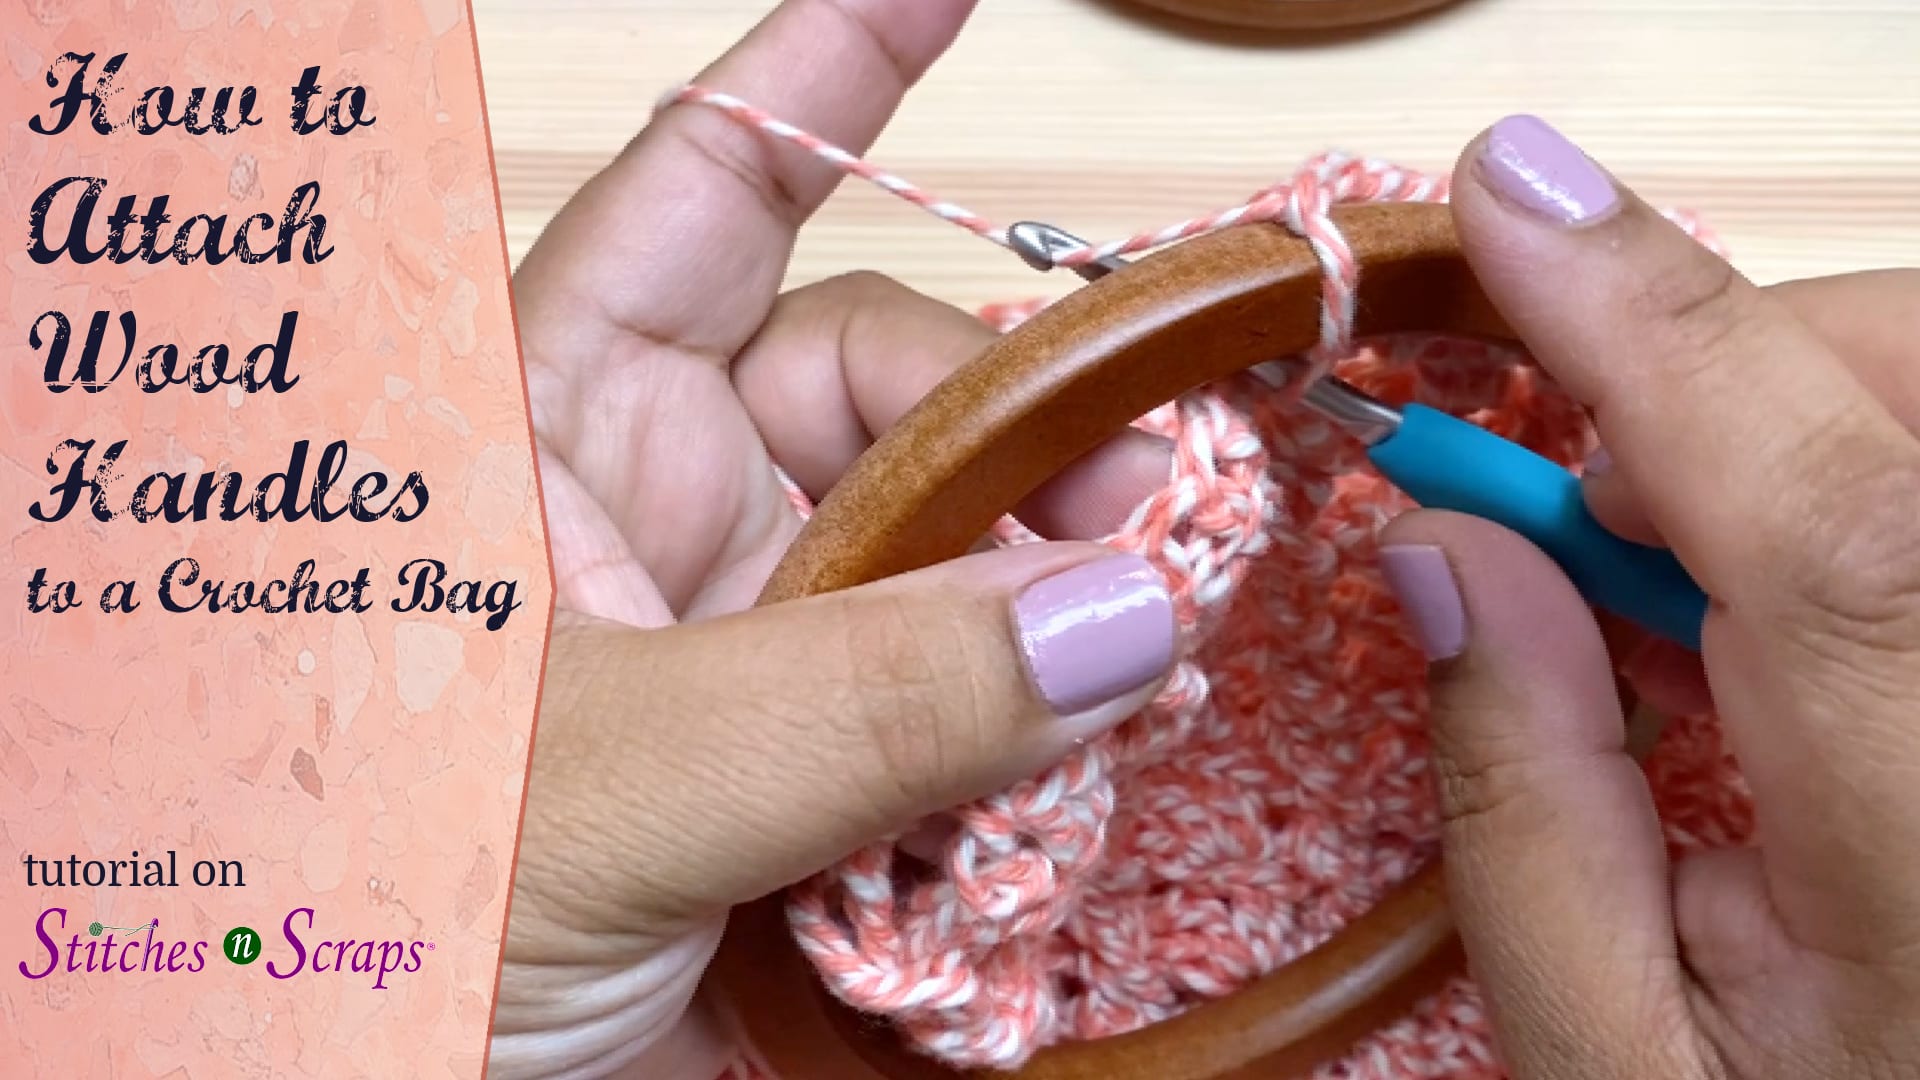 How to Attach Wood Handles to a Crochet Bag - Stitches n Scraps